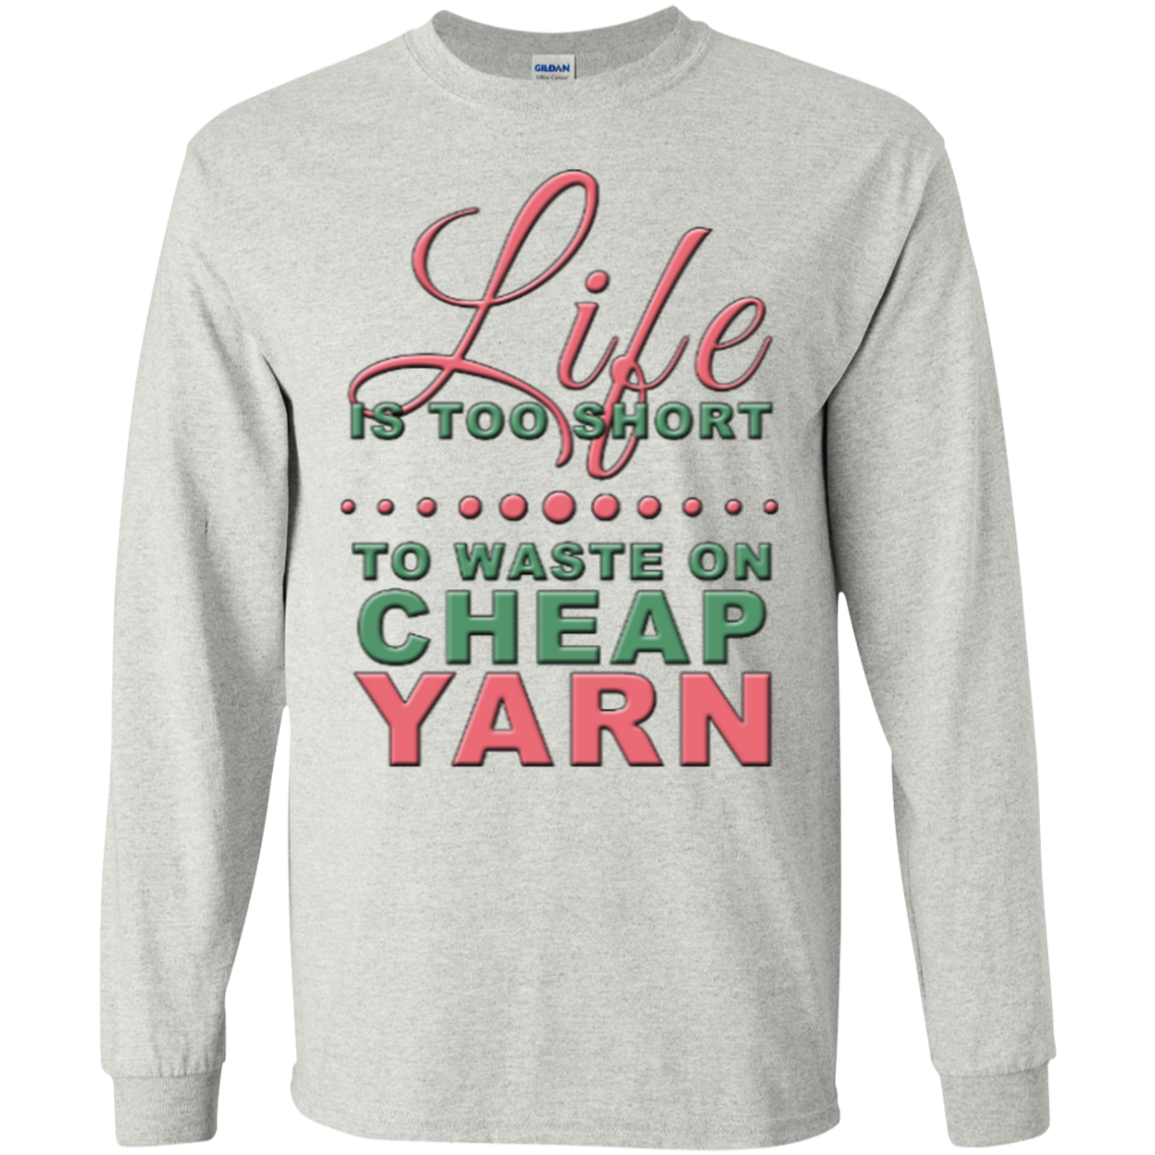 Life is Too Short to Use Cheap Yarn Long Sleeve Ultra Cotton T-Shirt - Crafter4Life - 2